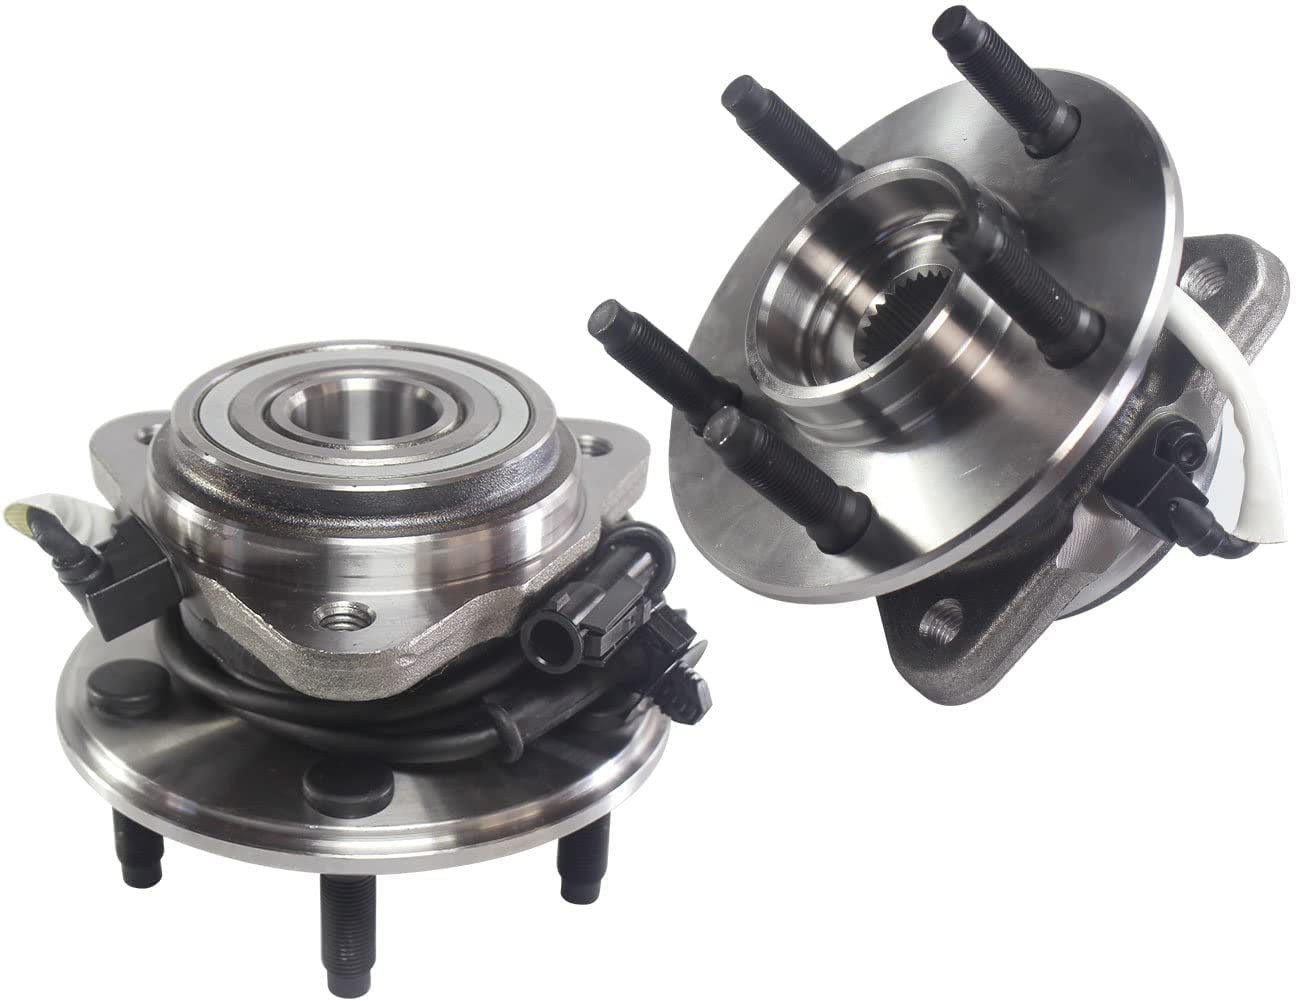 Front Wheel Hub & Bearing for Ford Ranger Mazda Pickup Truck 4WD w/ABS 515052 X1 